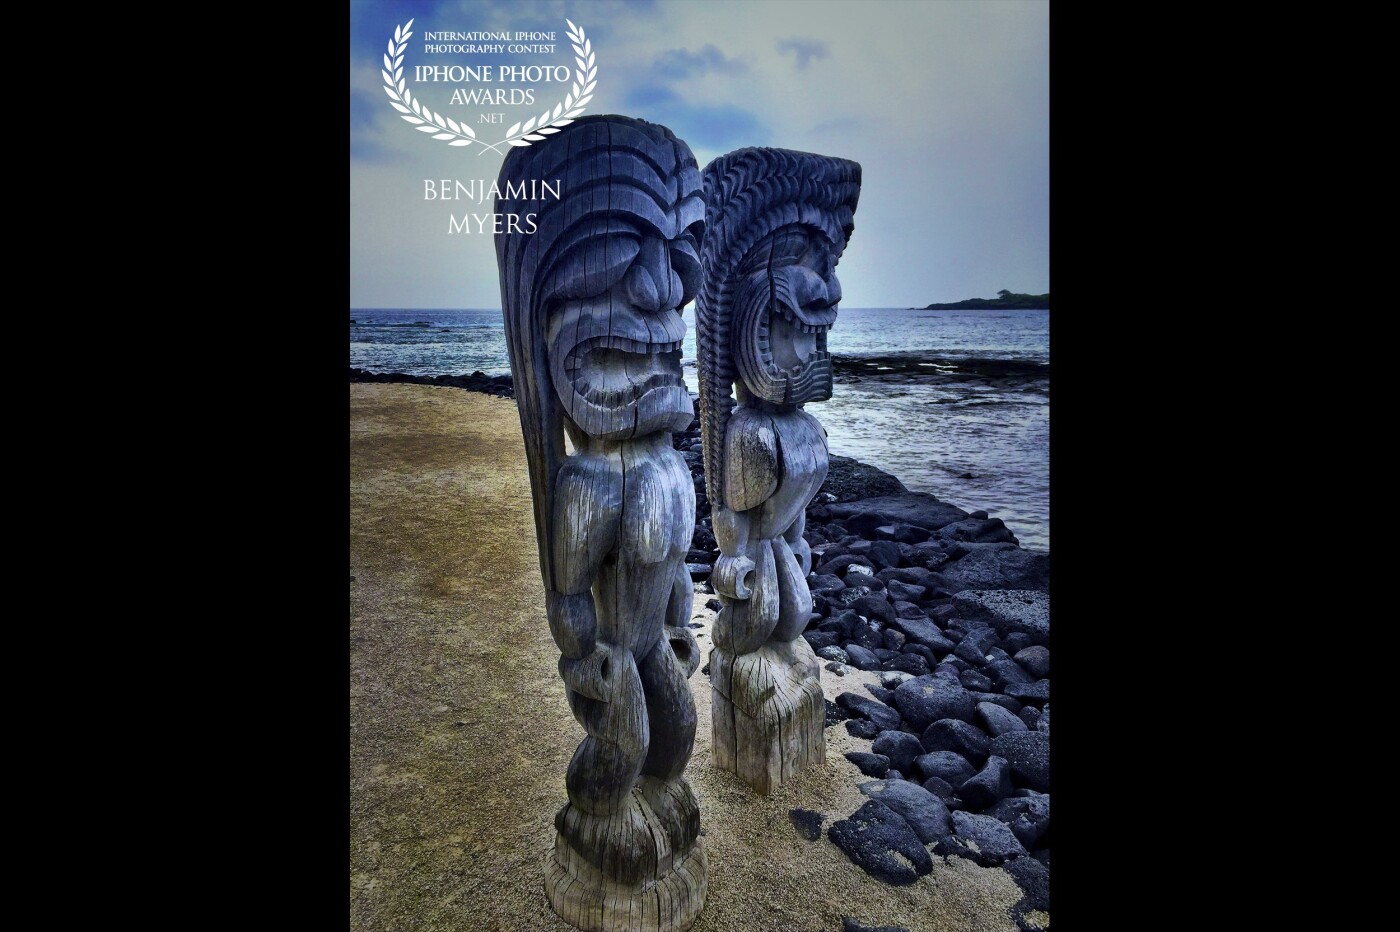 This shot was taken at Pu'uhonua o Honaunau National Historical Park, Big Island, Hawaii. It is referred to as the “City of Refuge” and if you had broken ancient Hawaiian law you could find safety if you made it here. A beautiful place to visit. 